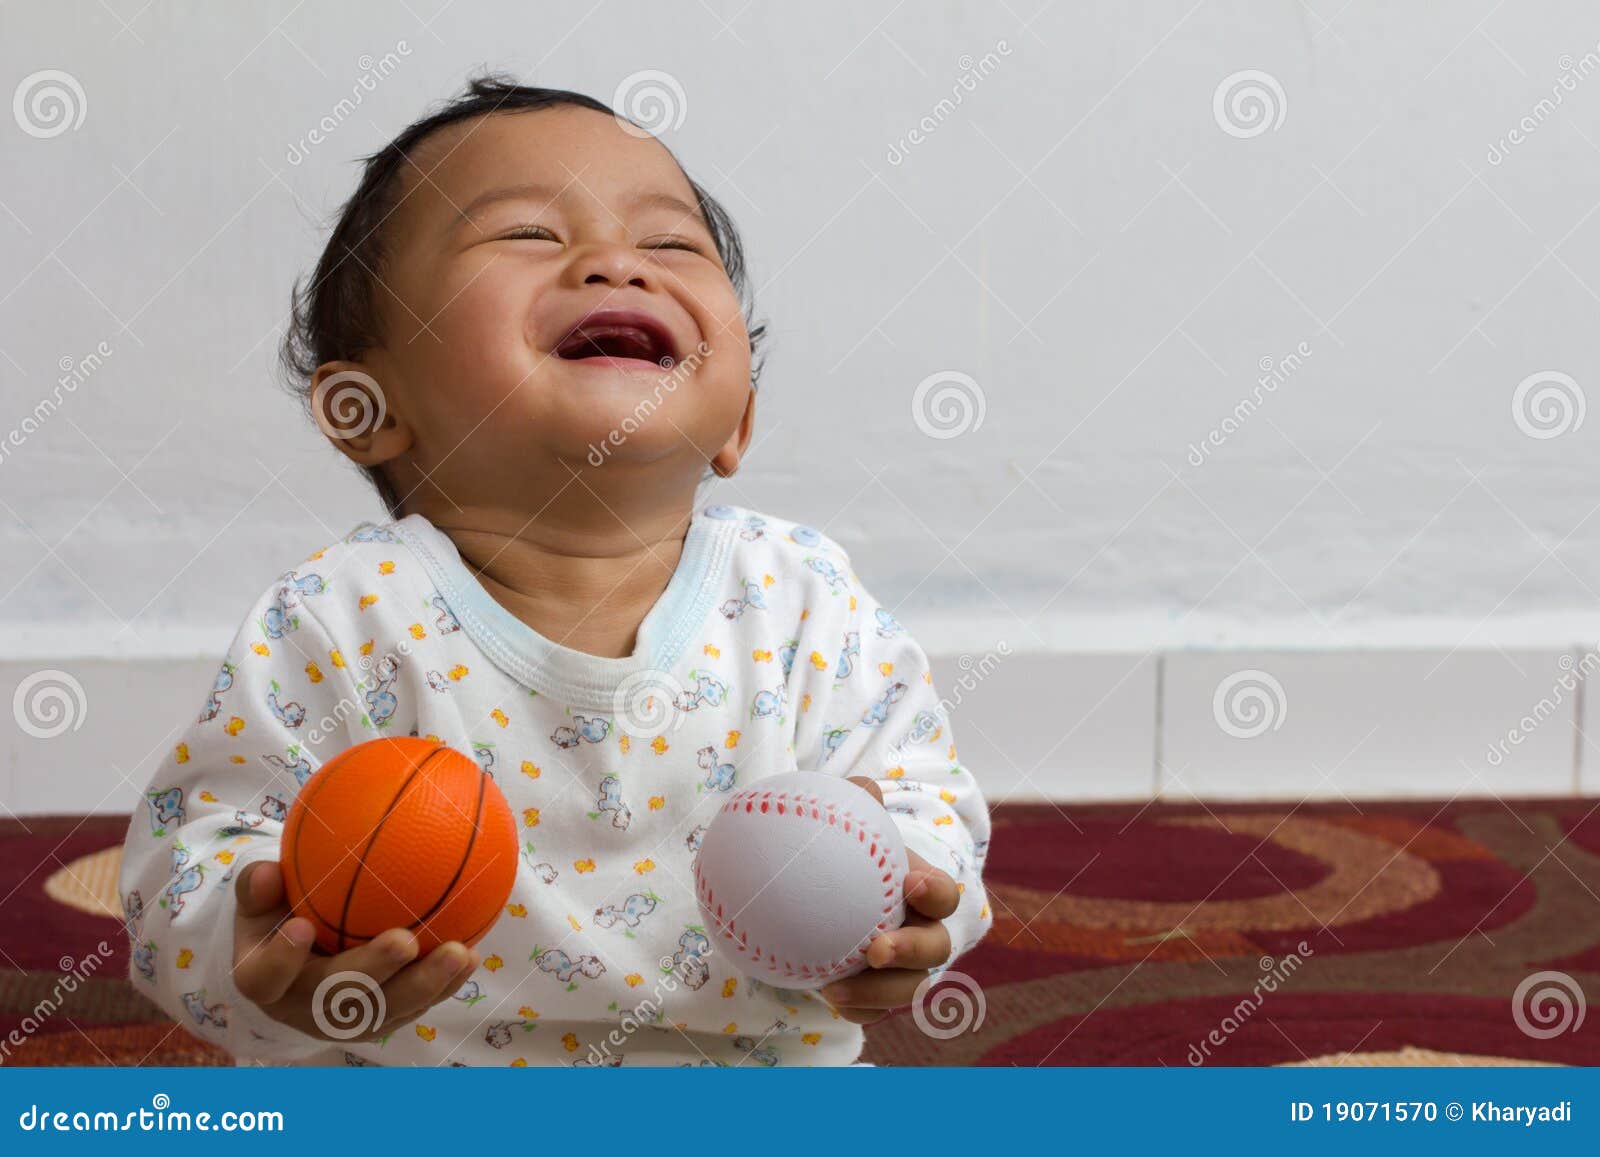 laughing baby.